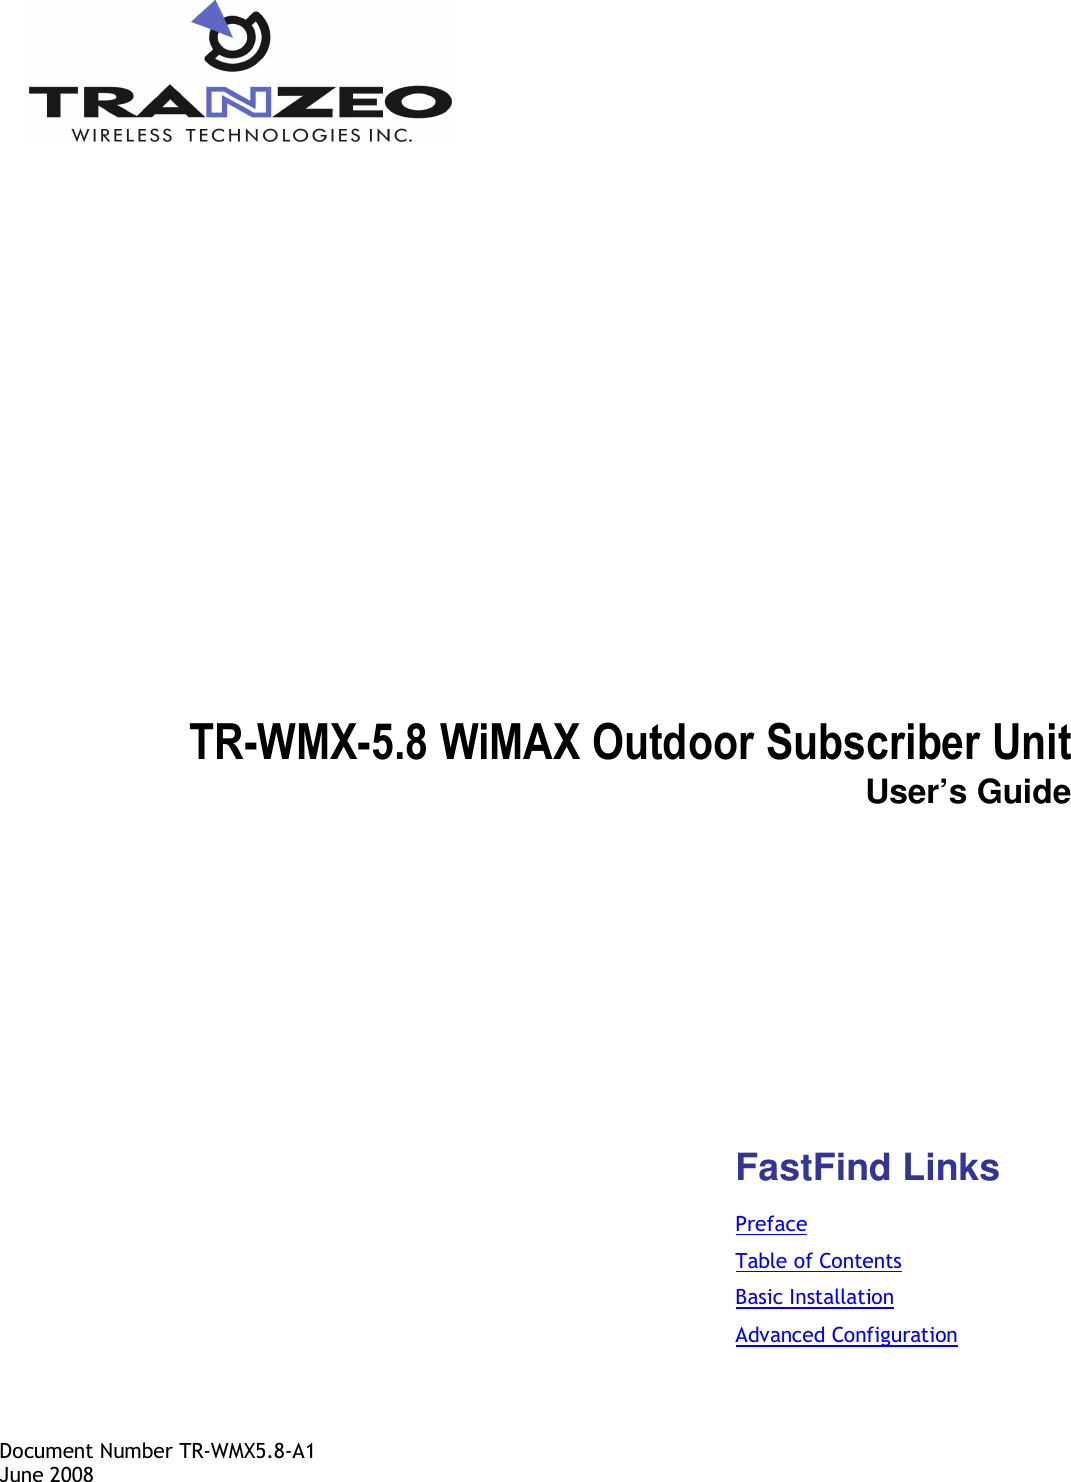   TR-WMX-5.8 WiMAX Outdoor Subscriber Unit User’s Guide        Document Number TR-WMX5.8-A1 June 2008 FastFind Links Preface Table of Contents Basic Installation Advanced Configuration 